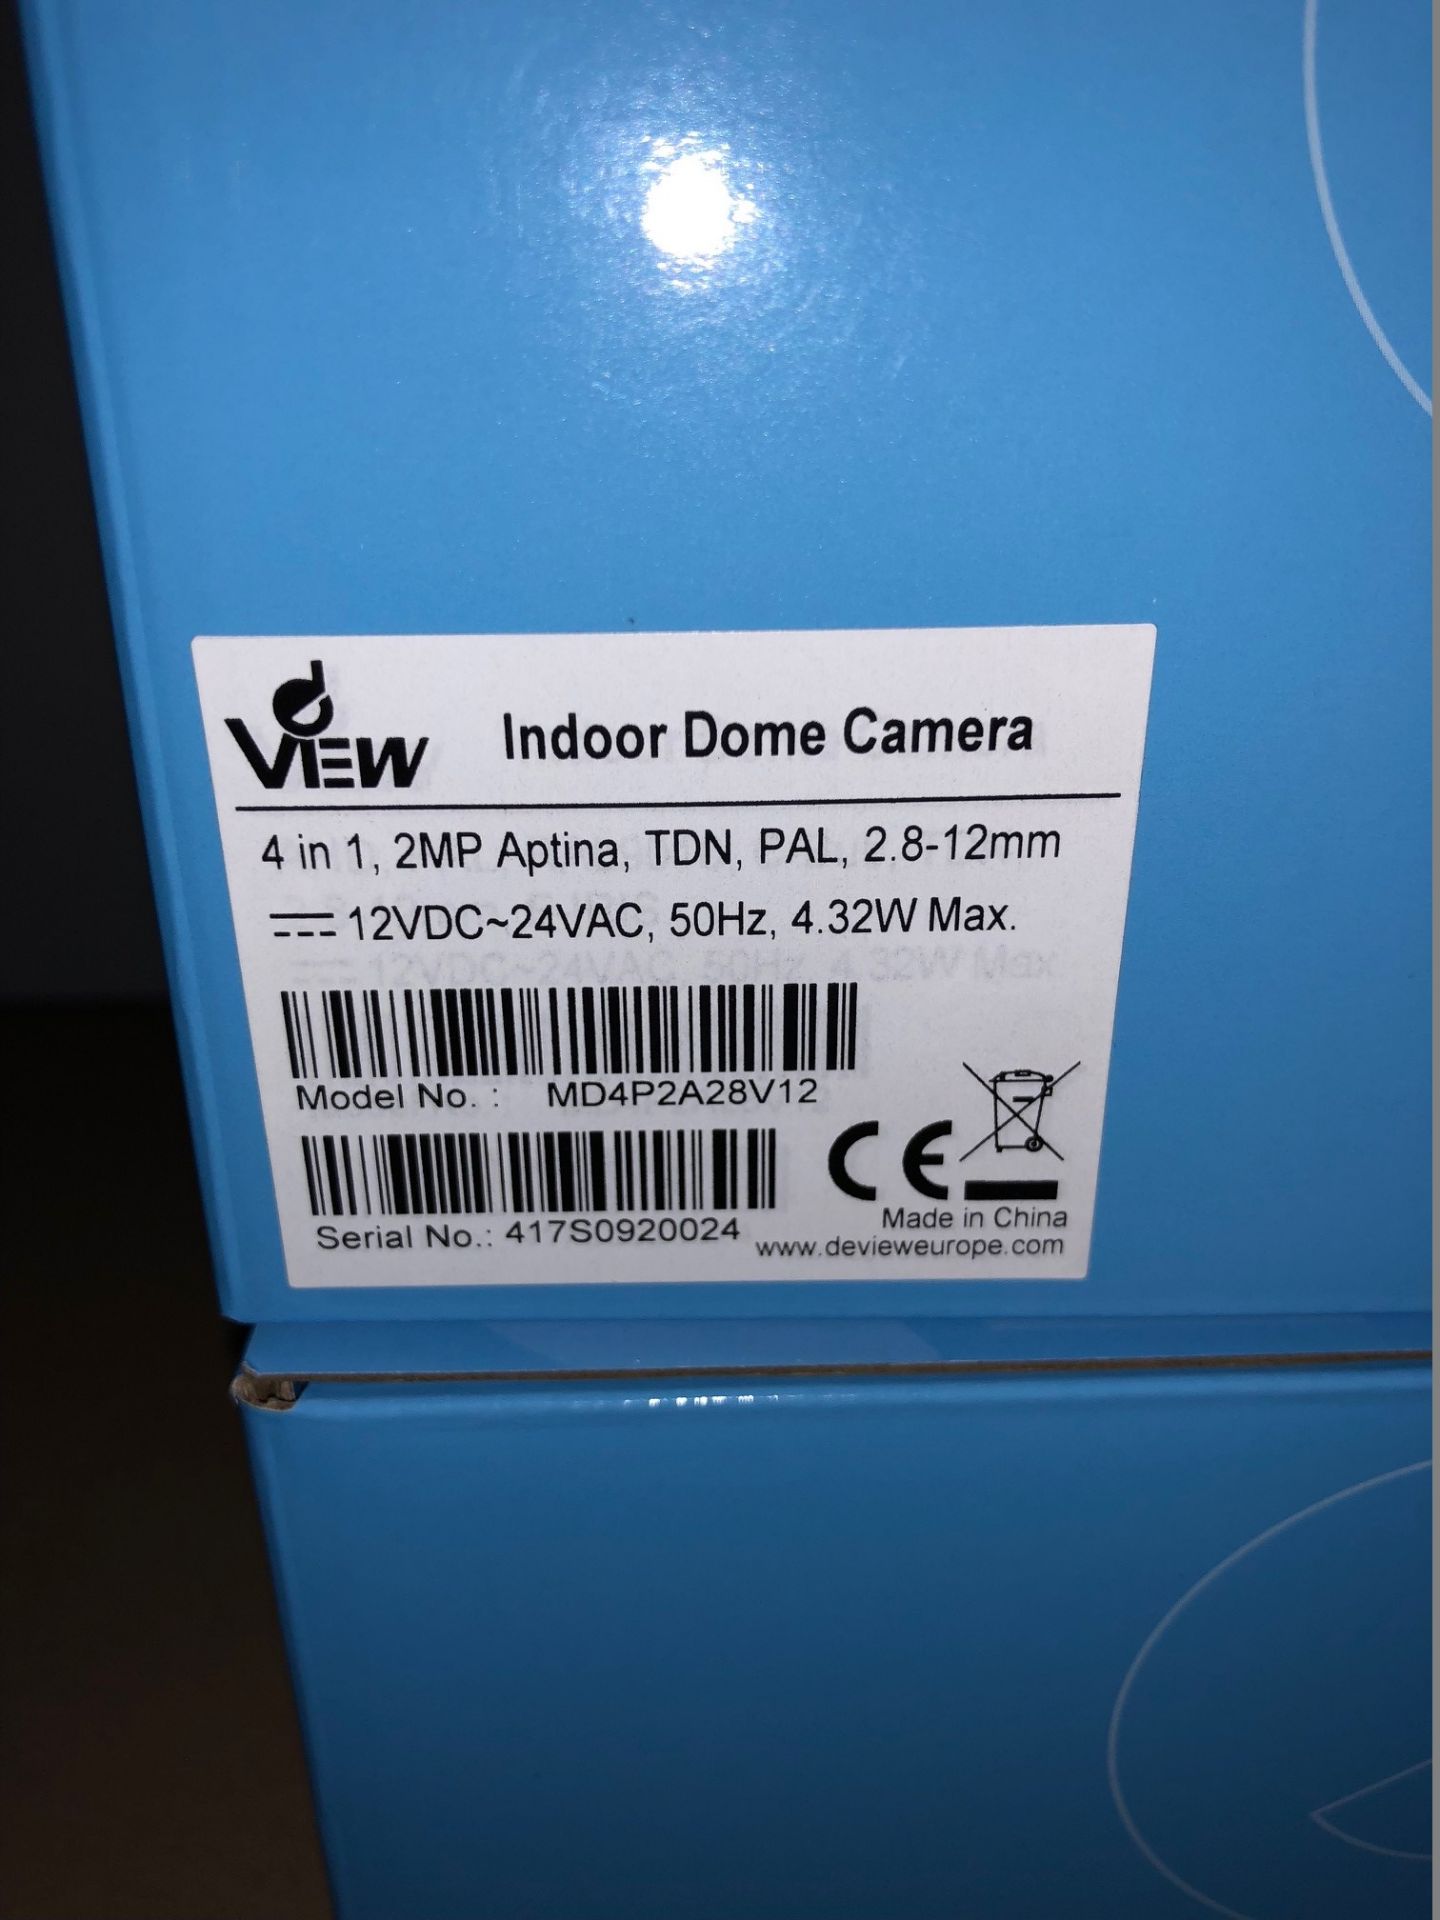 4 x dView Indoor Dome Cameras - 4 in 1, 2MP Aptina, TDN, PAL, 2.8 - 12mm - Model MD4P2A28V12 ( - Image 2 of 3